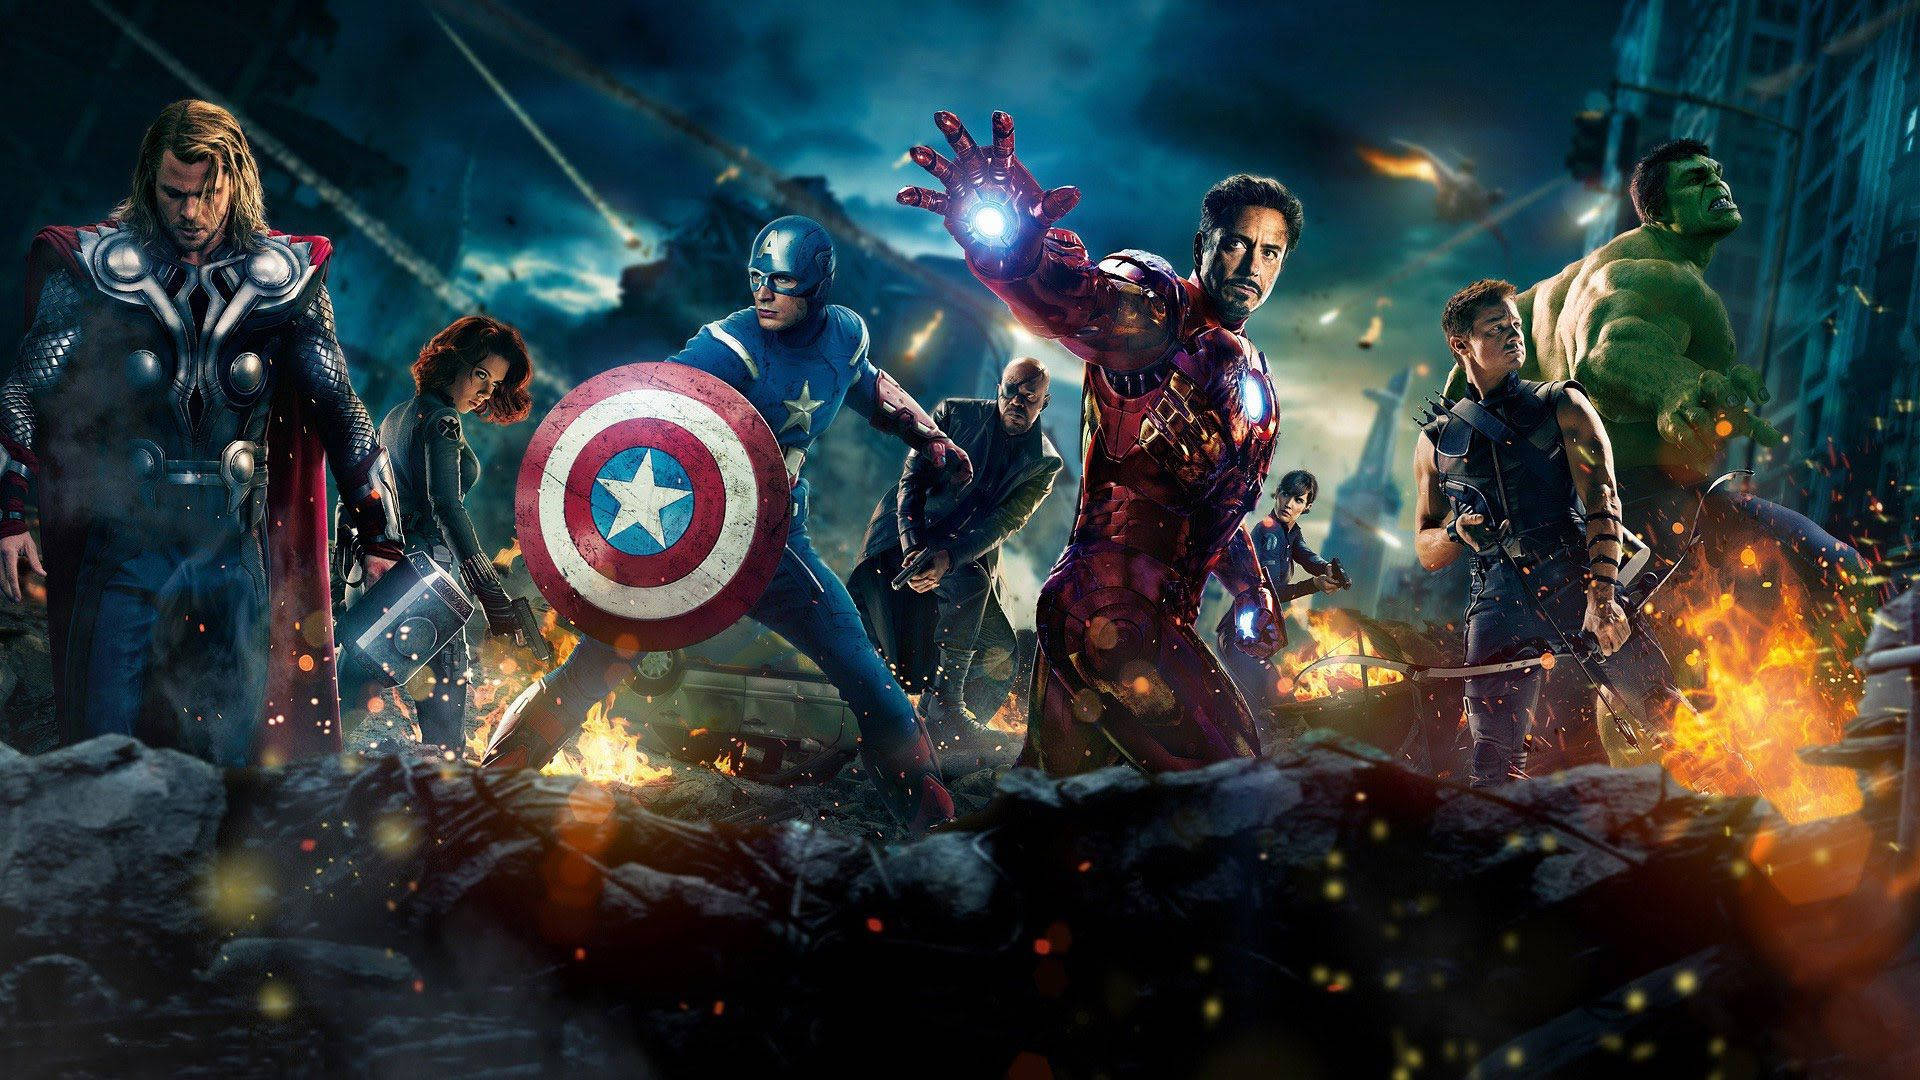 Earth's Mightiest Heroes Gather to Defenders its Fate | The Avengers Wallpaper